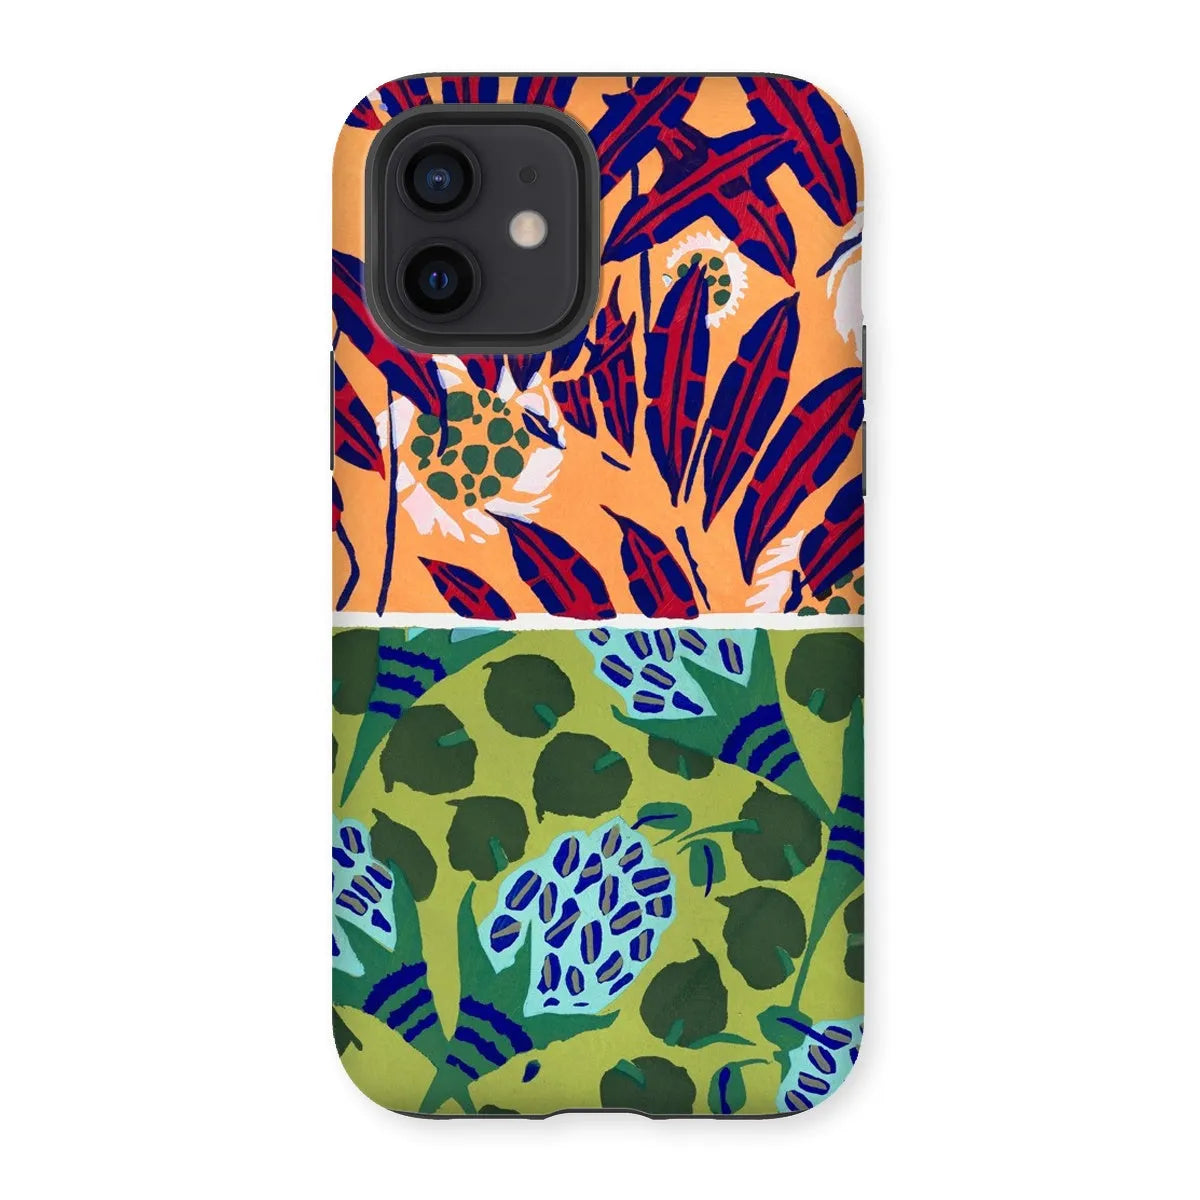 Fabric & Rugs Too - Pochoir Pattern Phone Case - E. A. Séguy - Iphone 12 / Matte - Mobile Phone Cases - Aesthetic Art